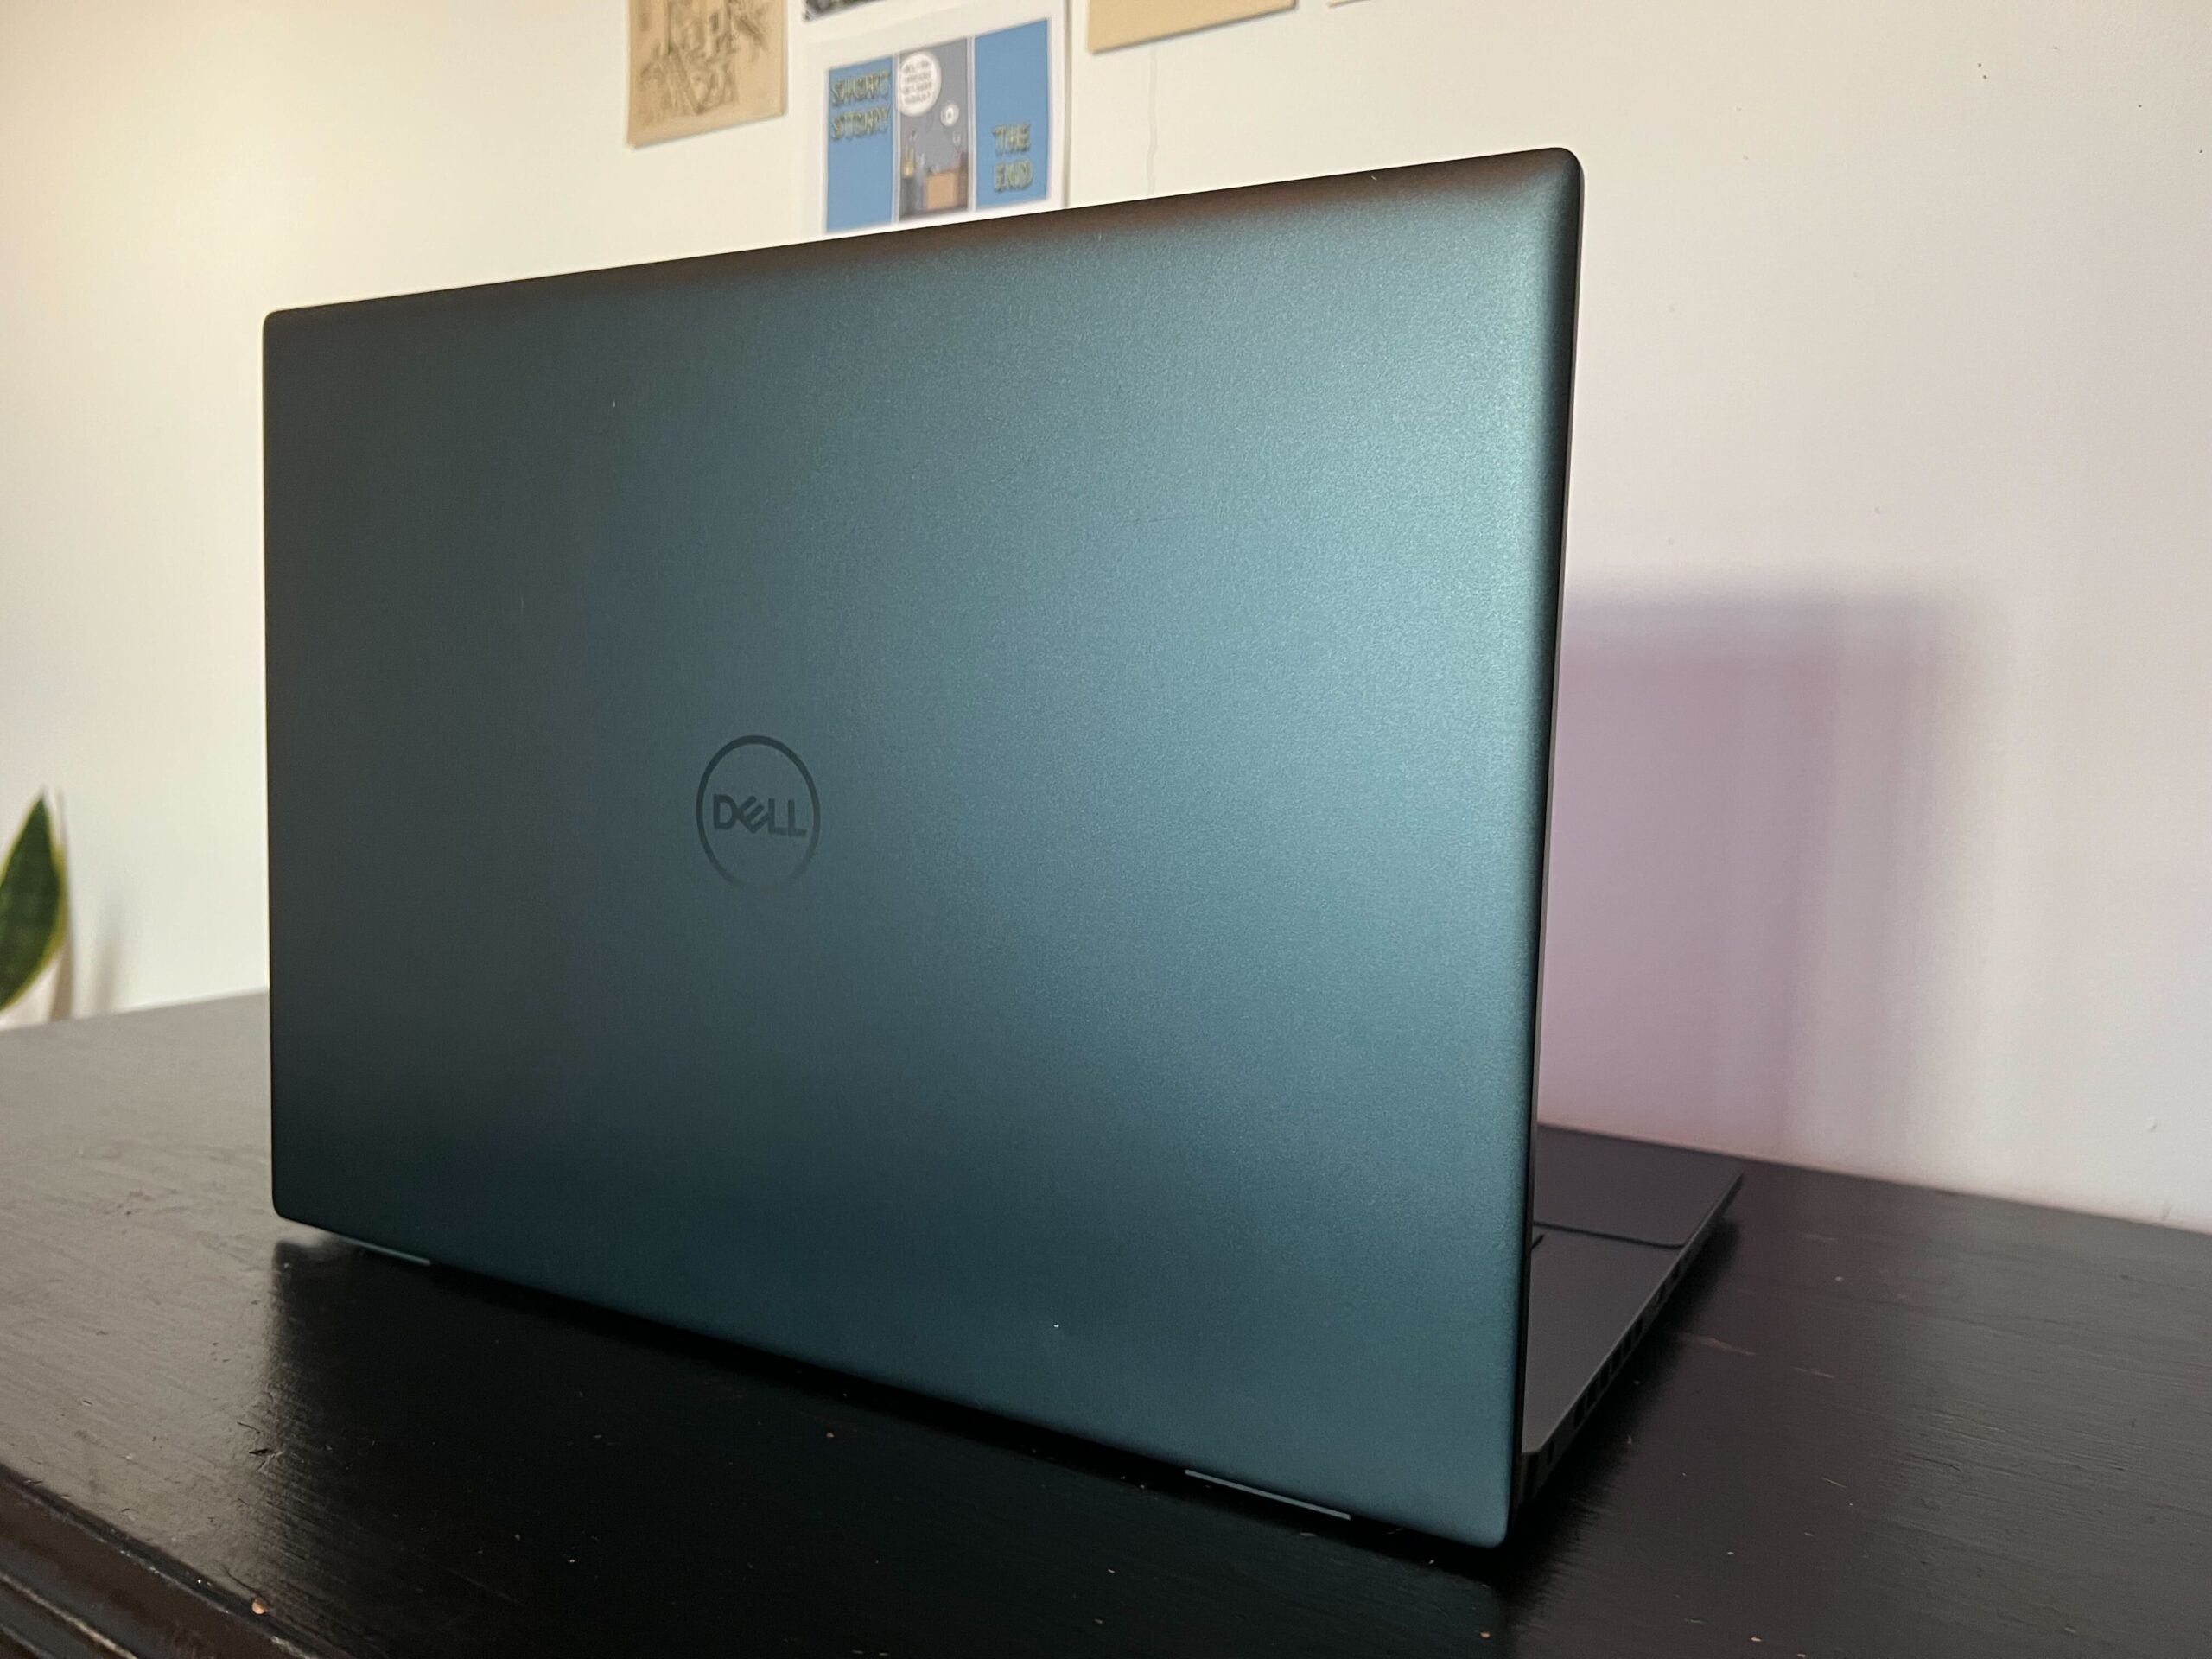 Dell Inspiron 16 Plus Review | Trusted Reviews